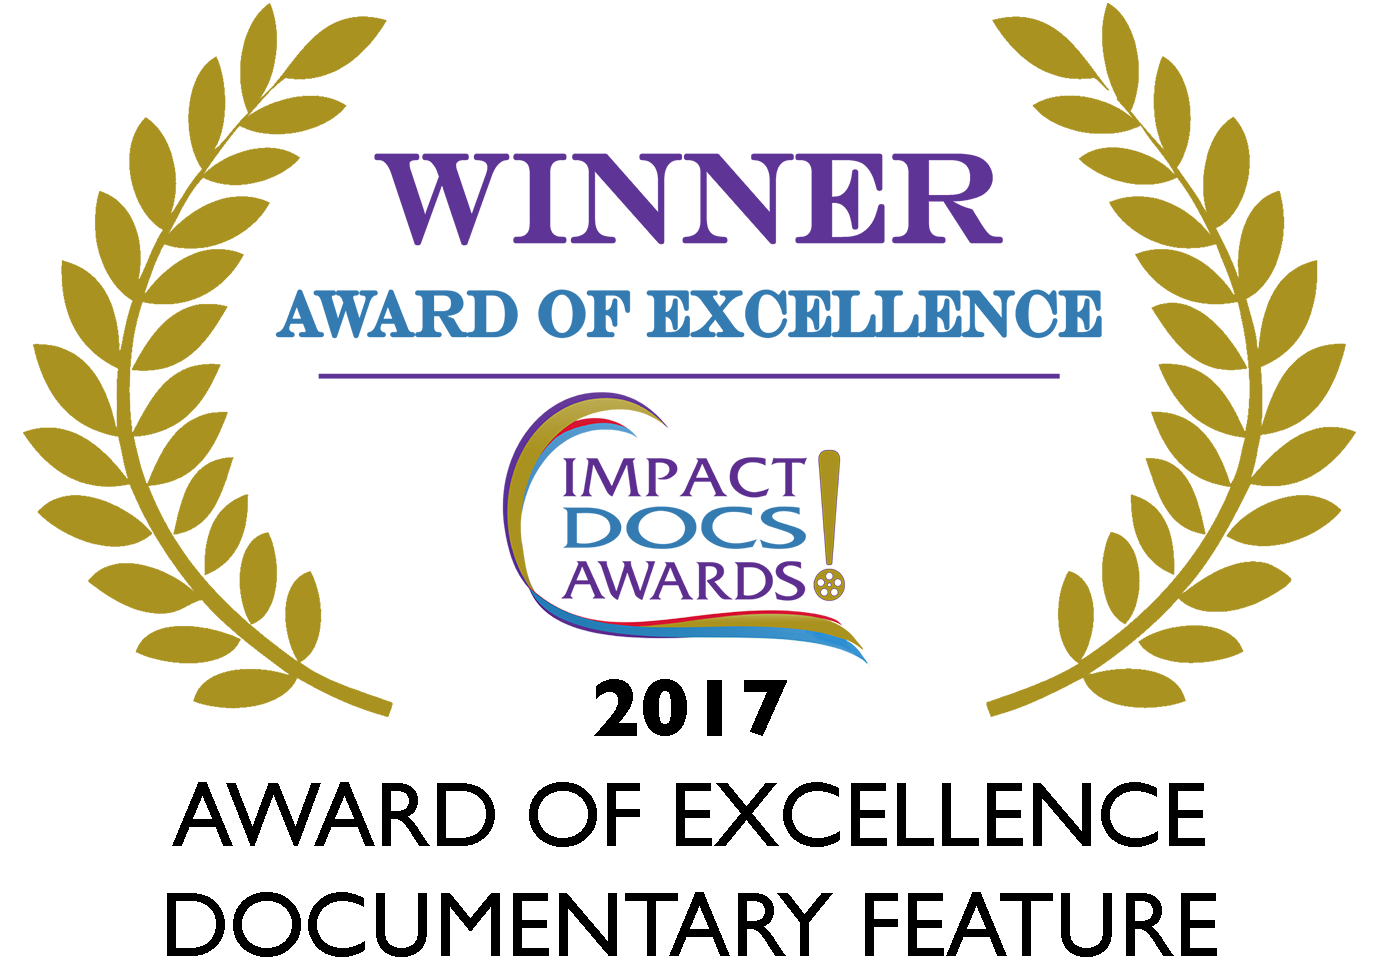 Sofia Wellman - Whats Love Got To Do With It - Film by Sofia Wellman - Impact DOCS - Award Of Excellence - Documentary Feature 2017